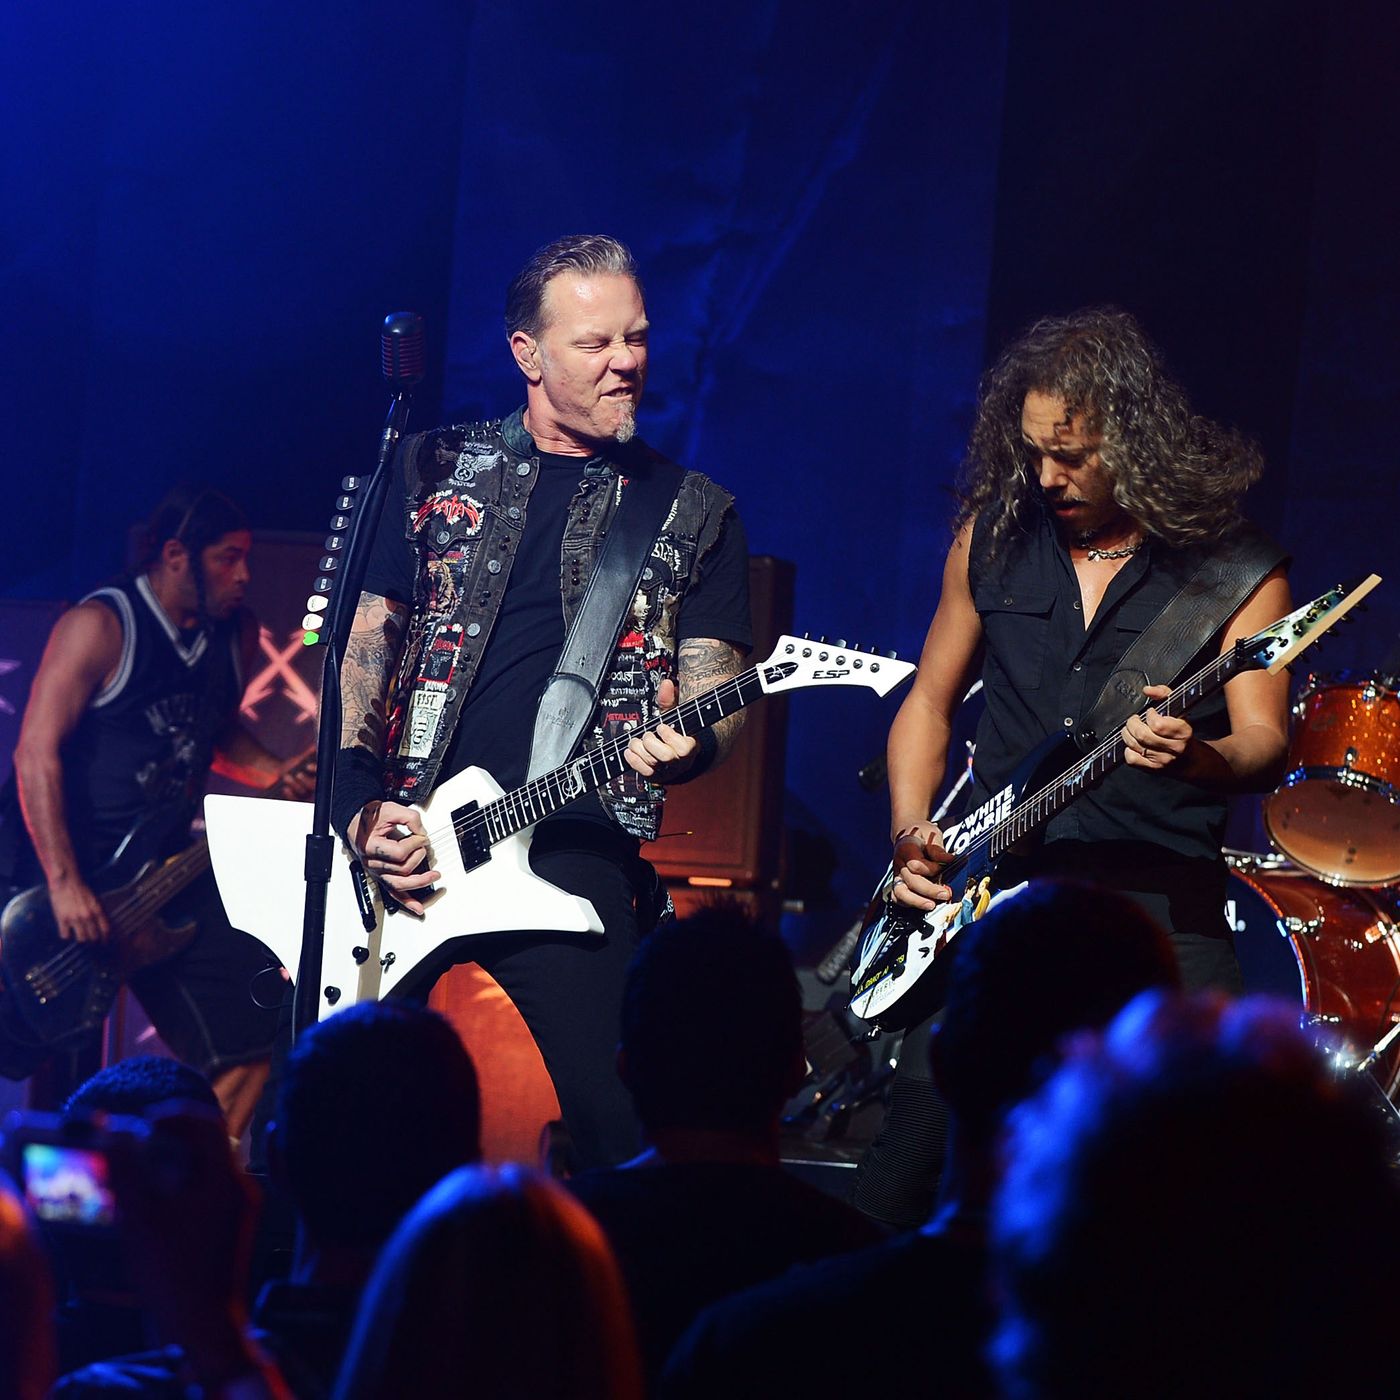 Metallica - Spit Out The Bone - Rock and Metal Music Concert